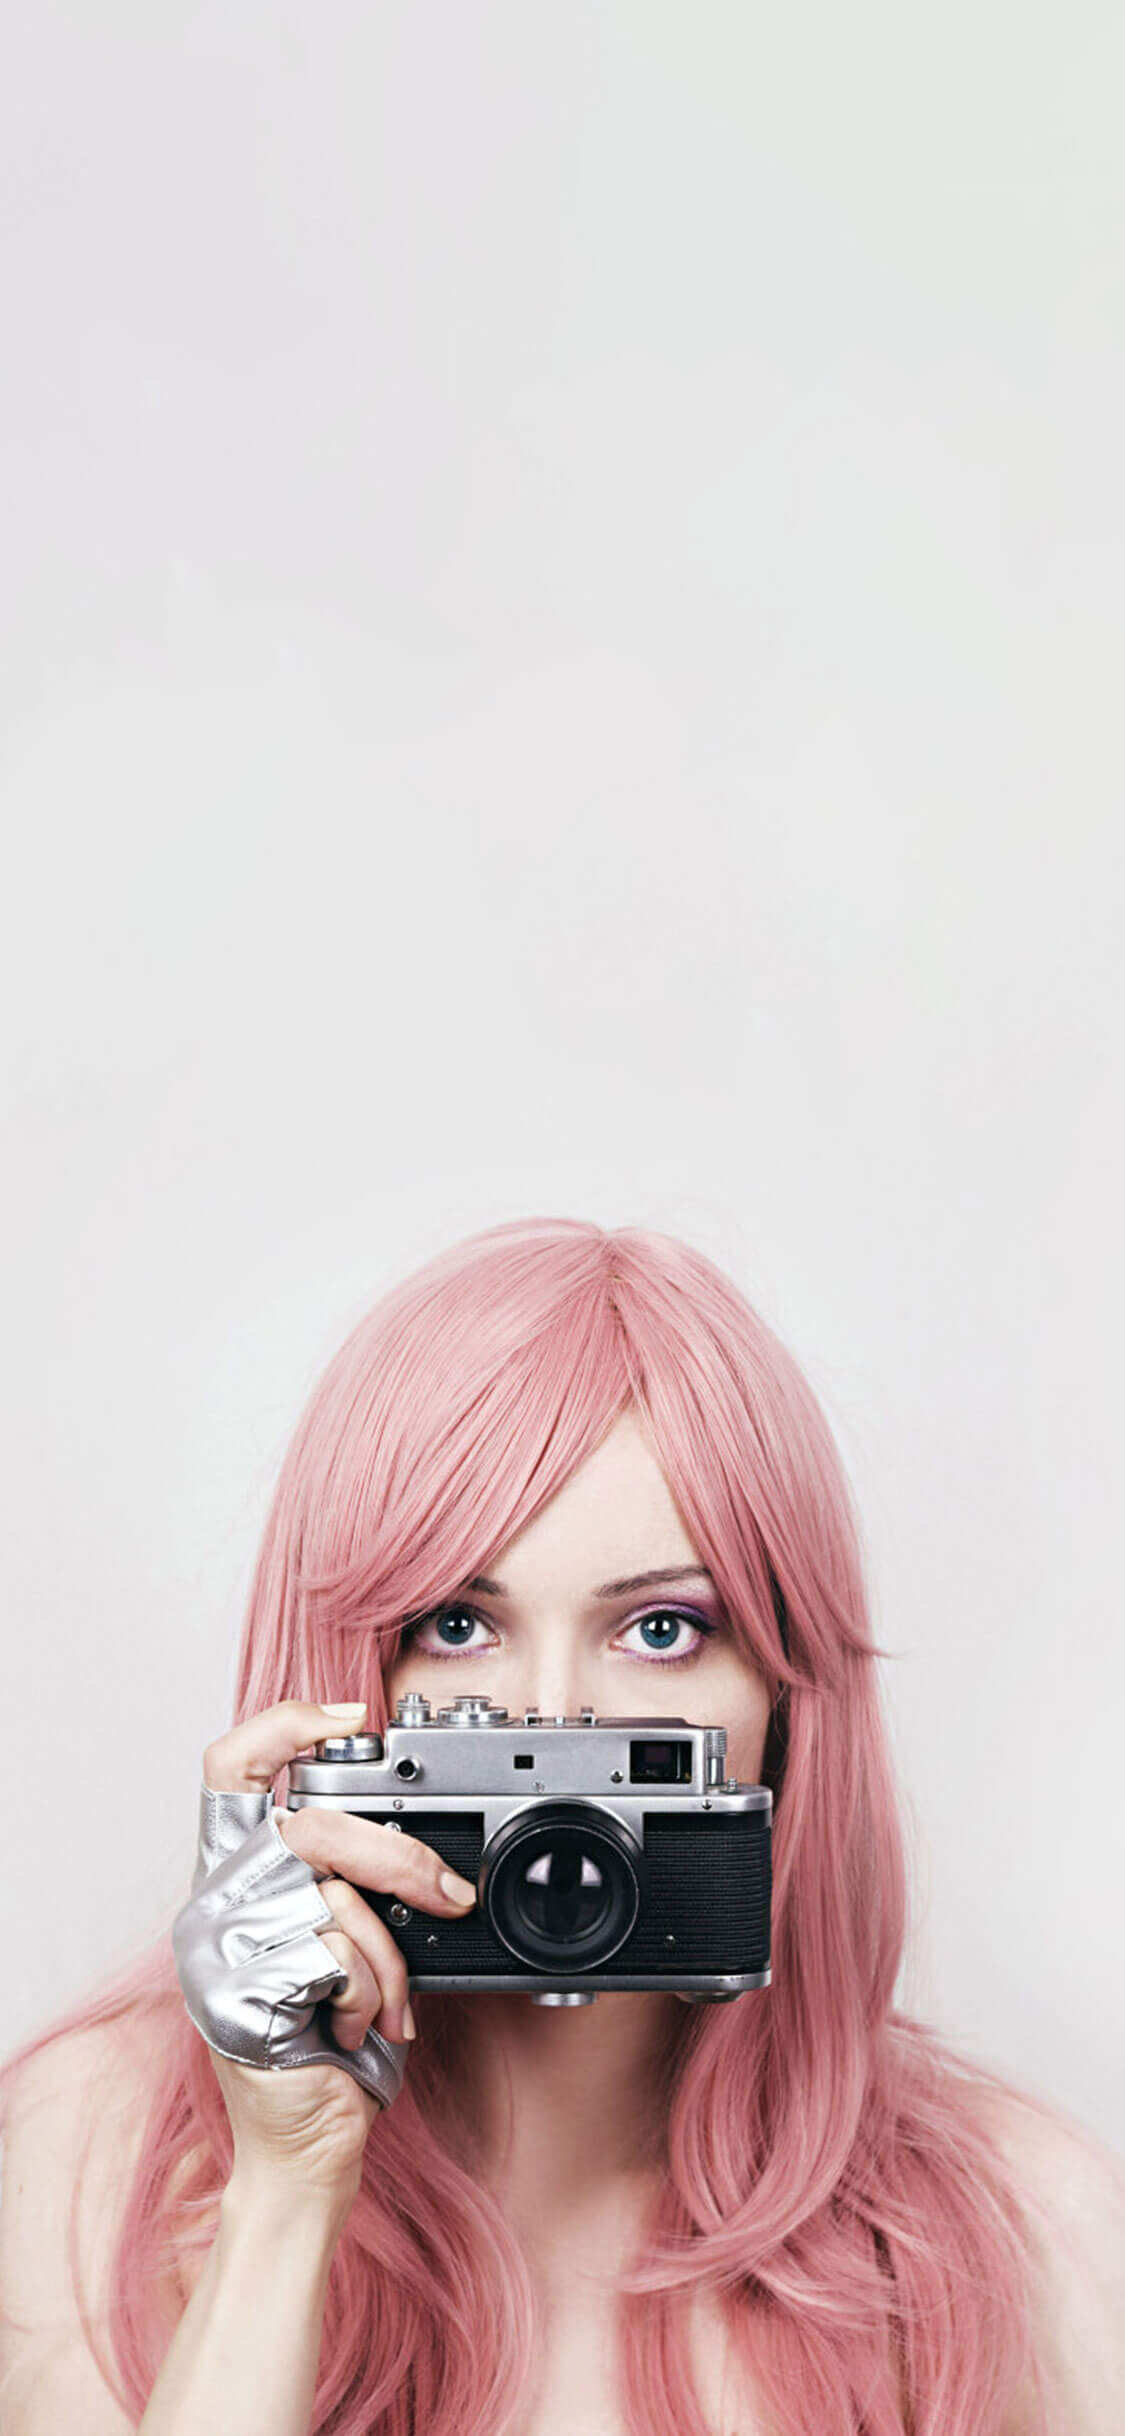 Cool-girl-holding-a-camera